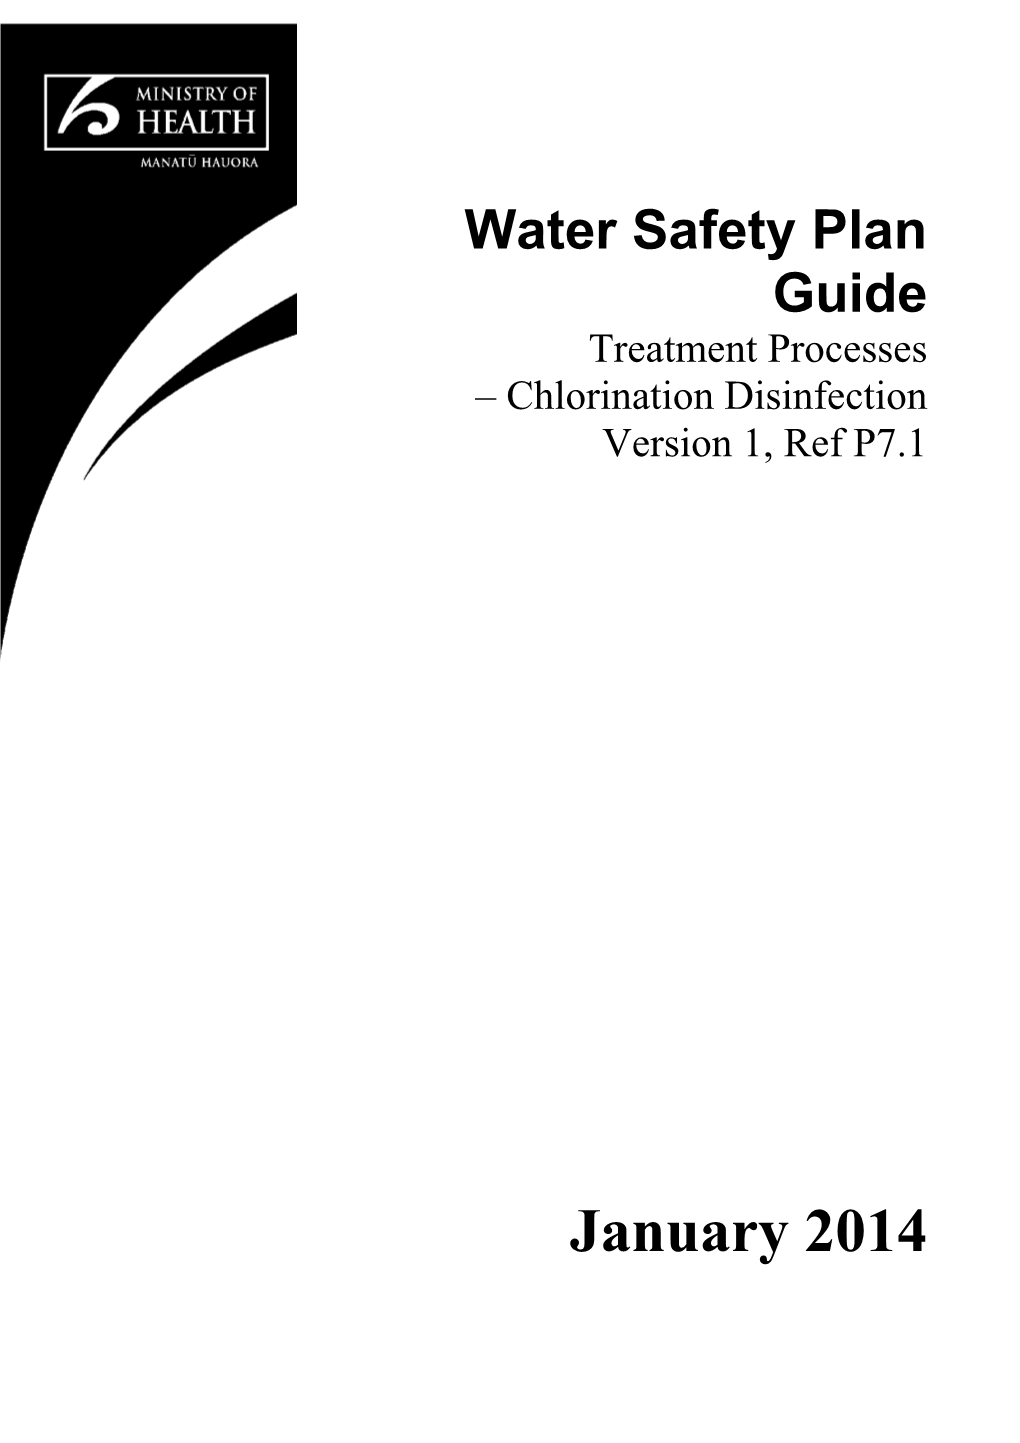 Water Safety Plan Guide: Treatment Processes Chlorination Disinfection